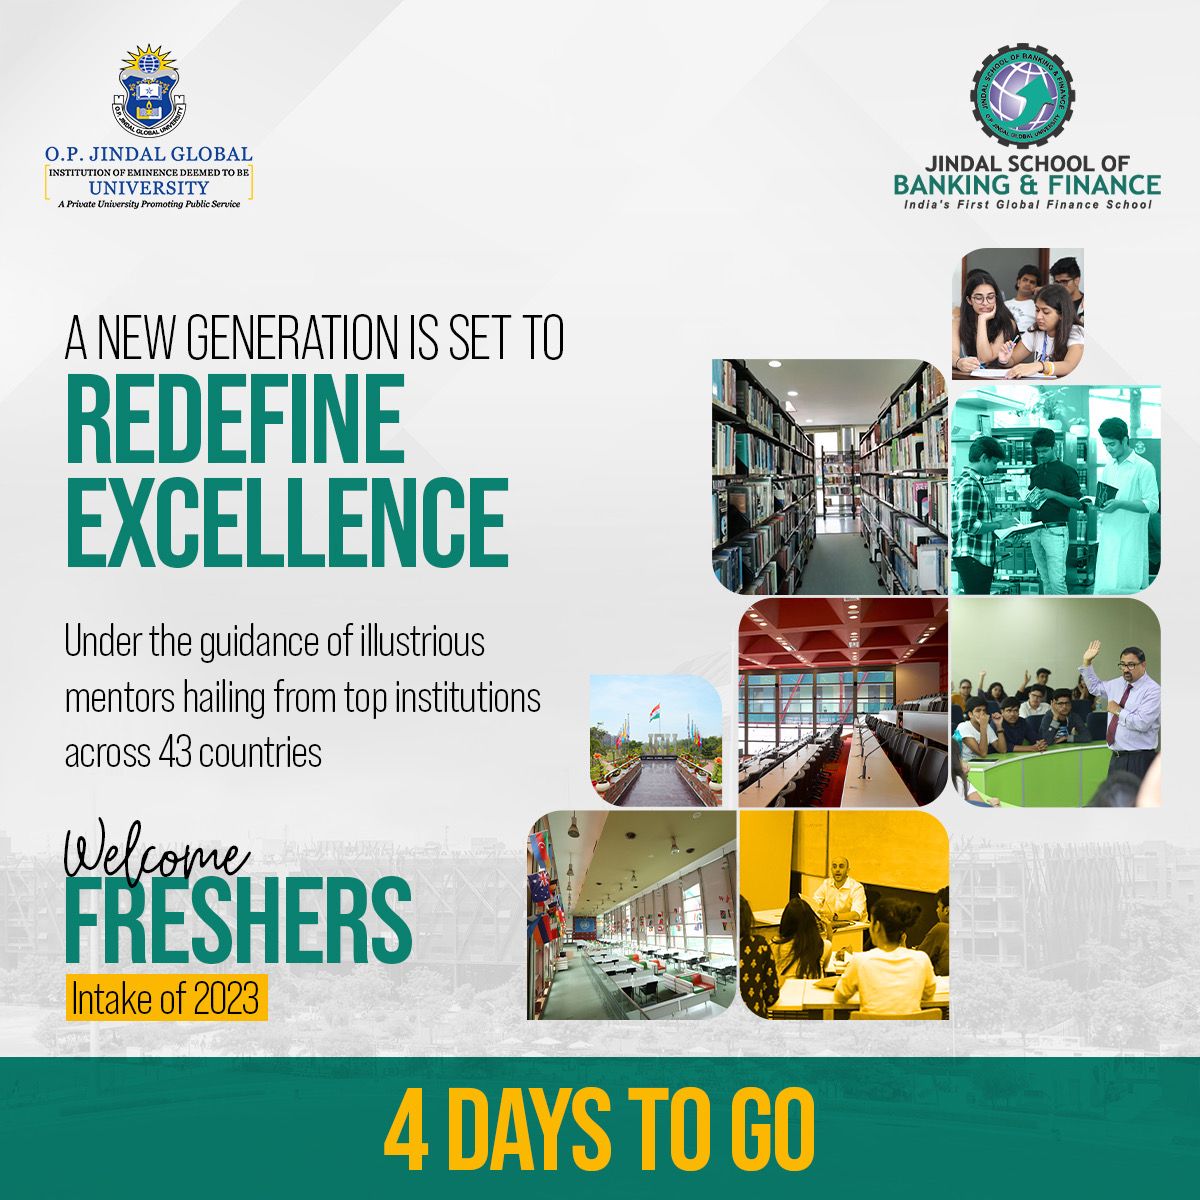 We are gearing up to welcome the freshers on 2023 at Jindal School of Banking & Finance (JSBF) in just 4 days. The new generation of future leaders will be guided by mentors from renowned institutions from 43 countries. #JSBF #InductionWeek #Welcome2023 #AcademicExcellence